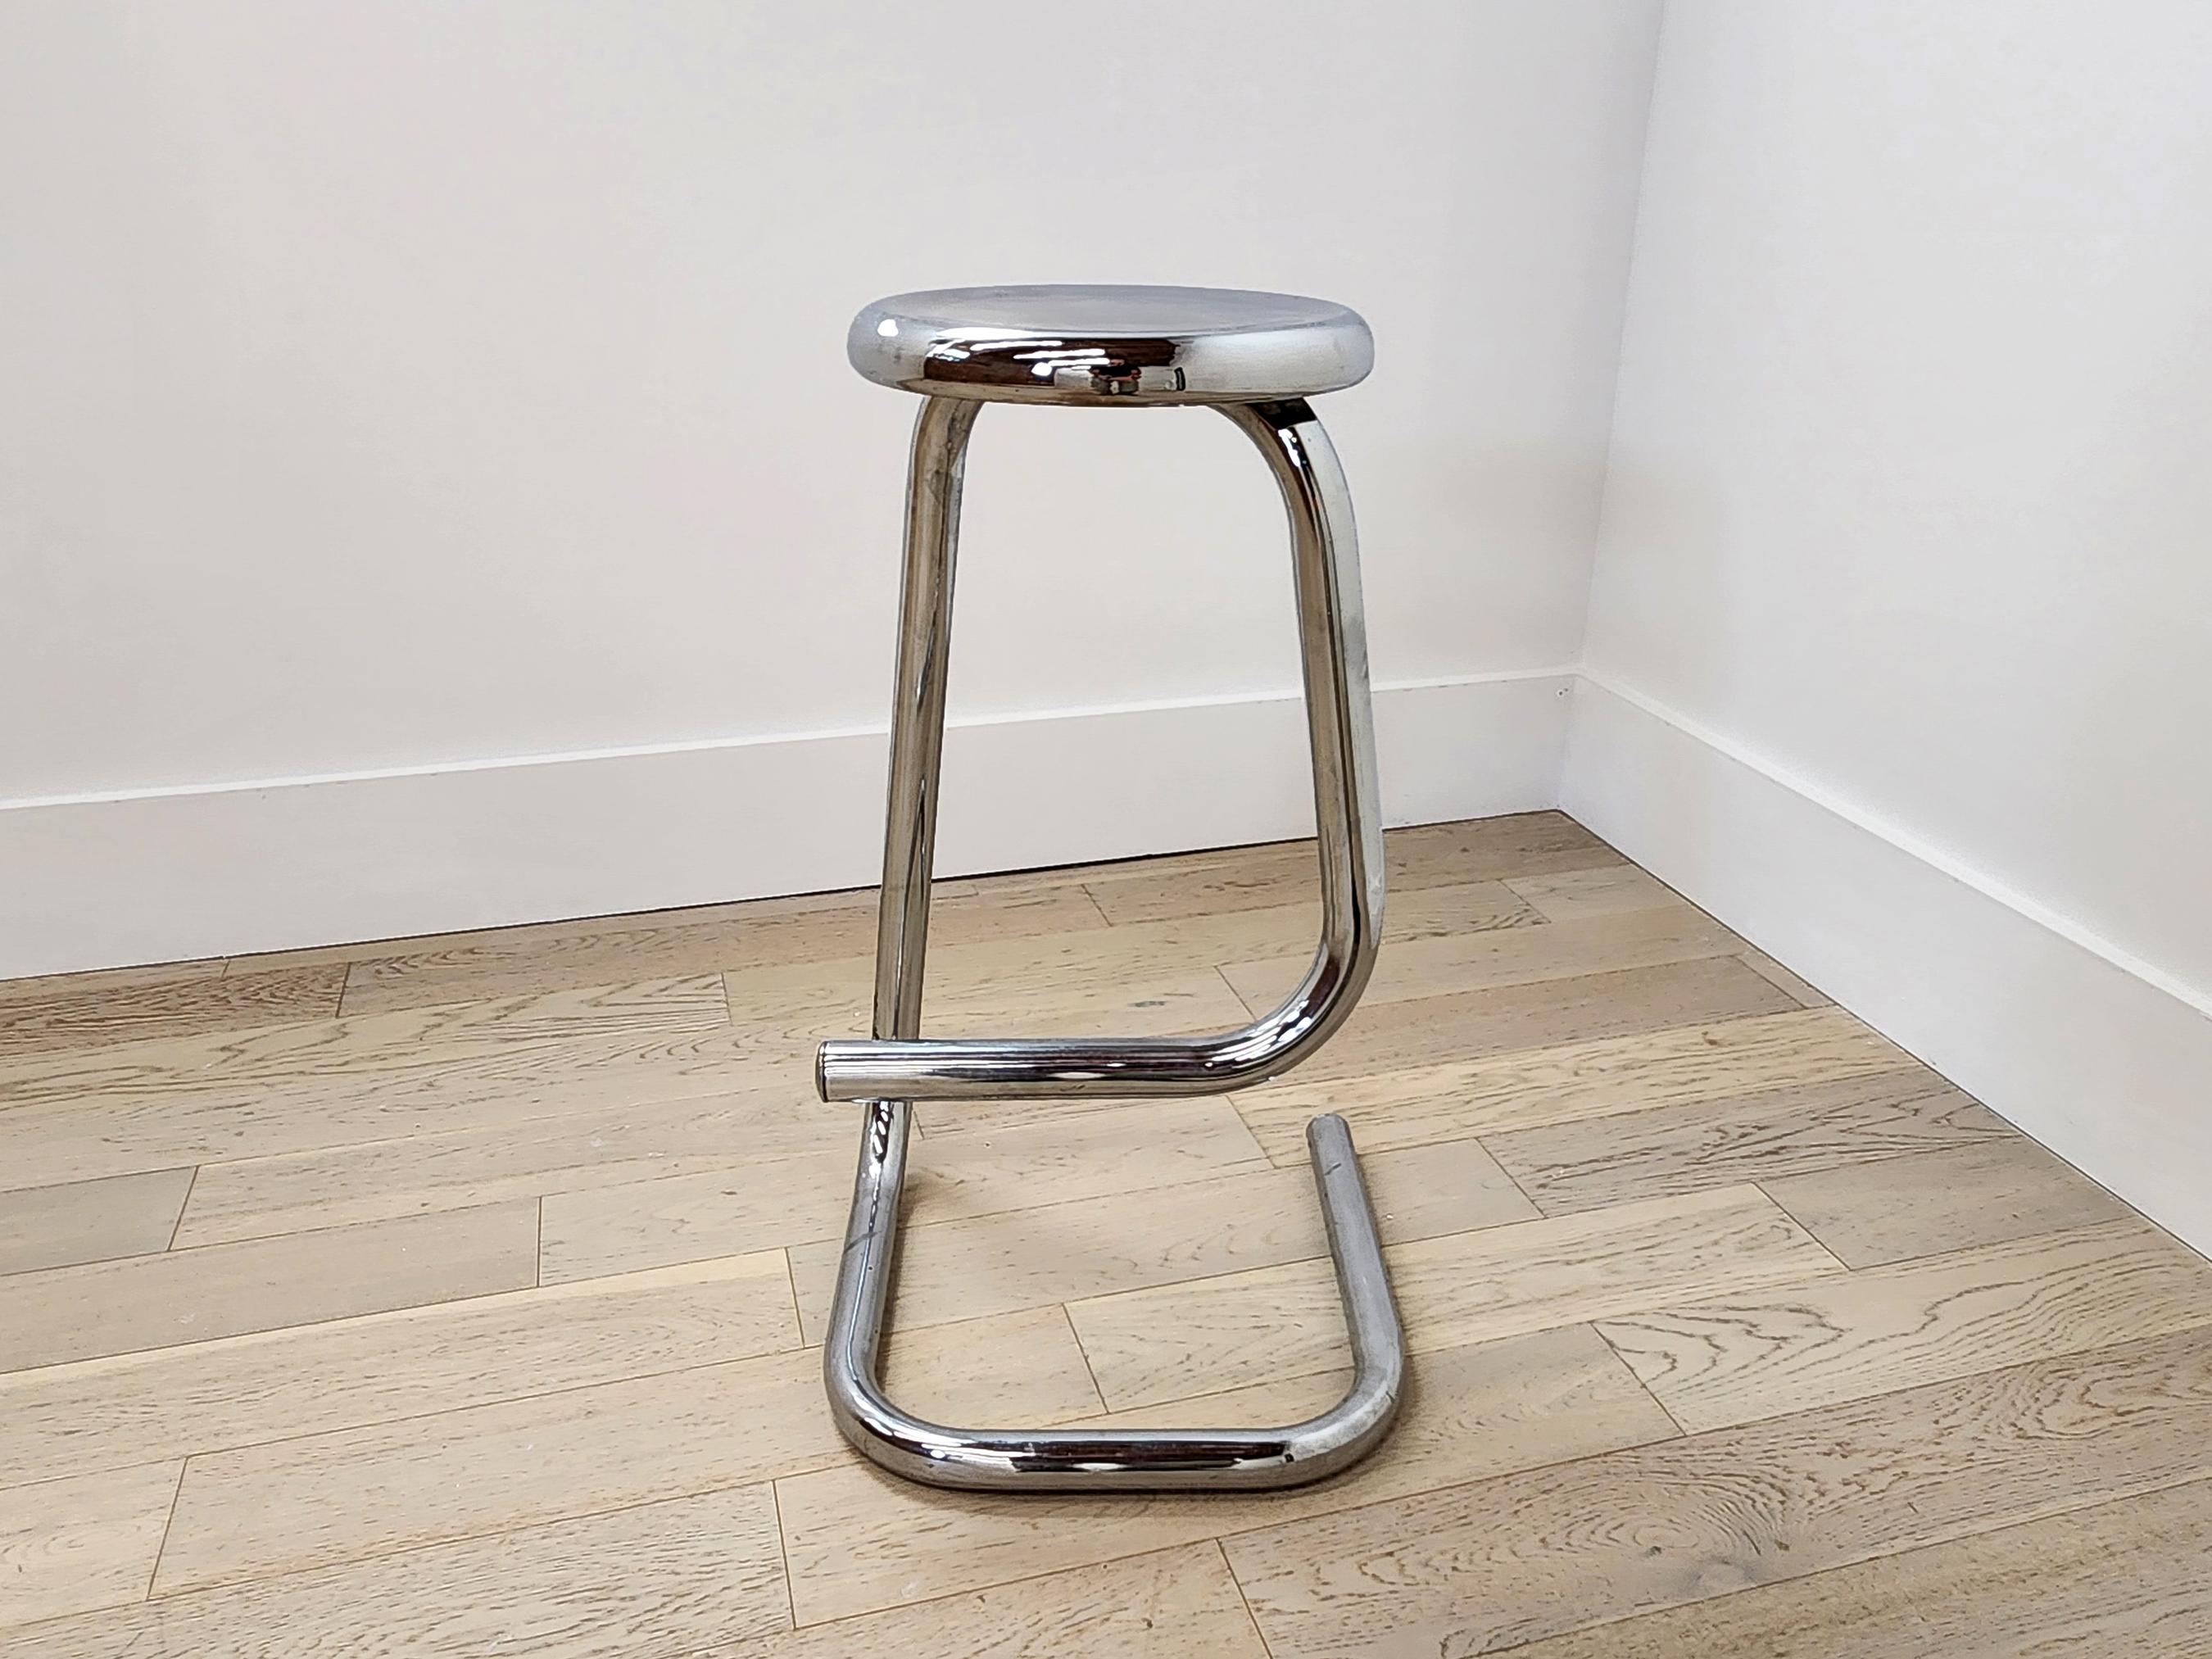 A simple and beautiful design built using a continuous piece of tubular steel that is bent to form a cantilevered base and solid footrest. The resulting bent paperclip form is purposeful and unique.

Created by Canadian designer Hugh Hamilton and